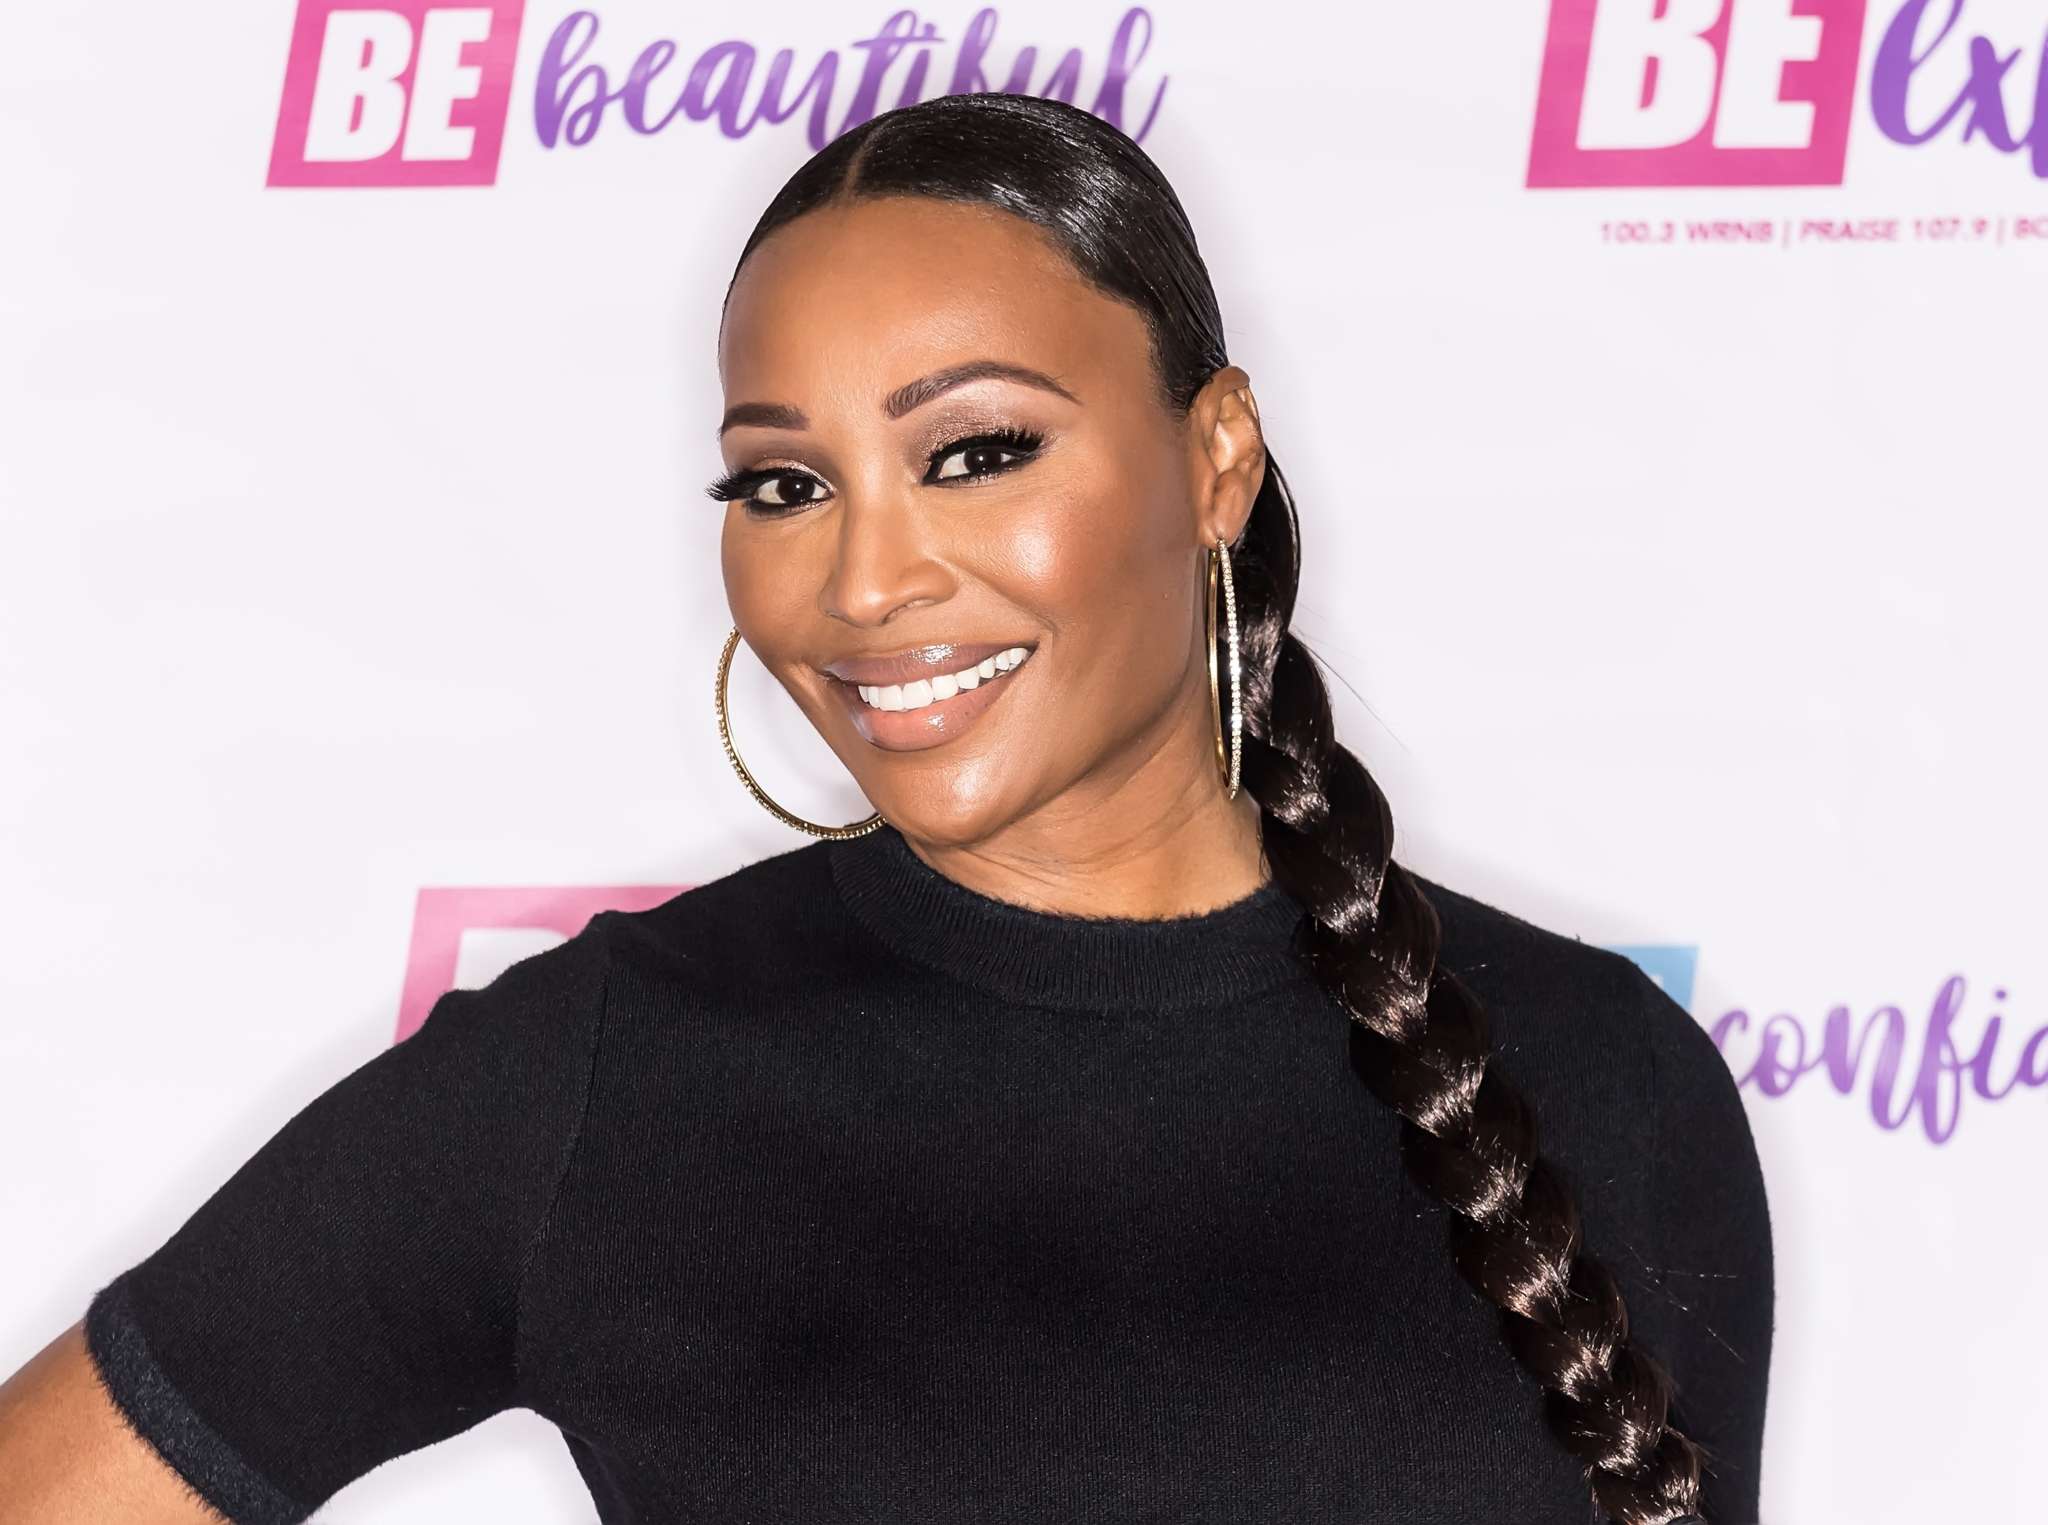 ”cynthia-bailey-surprises-her-fans-with-a-closet-reveal-check-out-her-video”